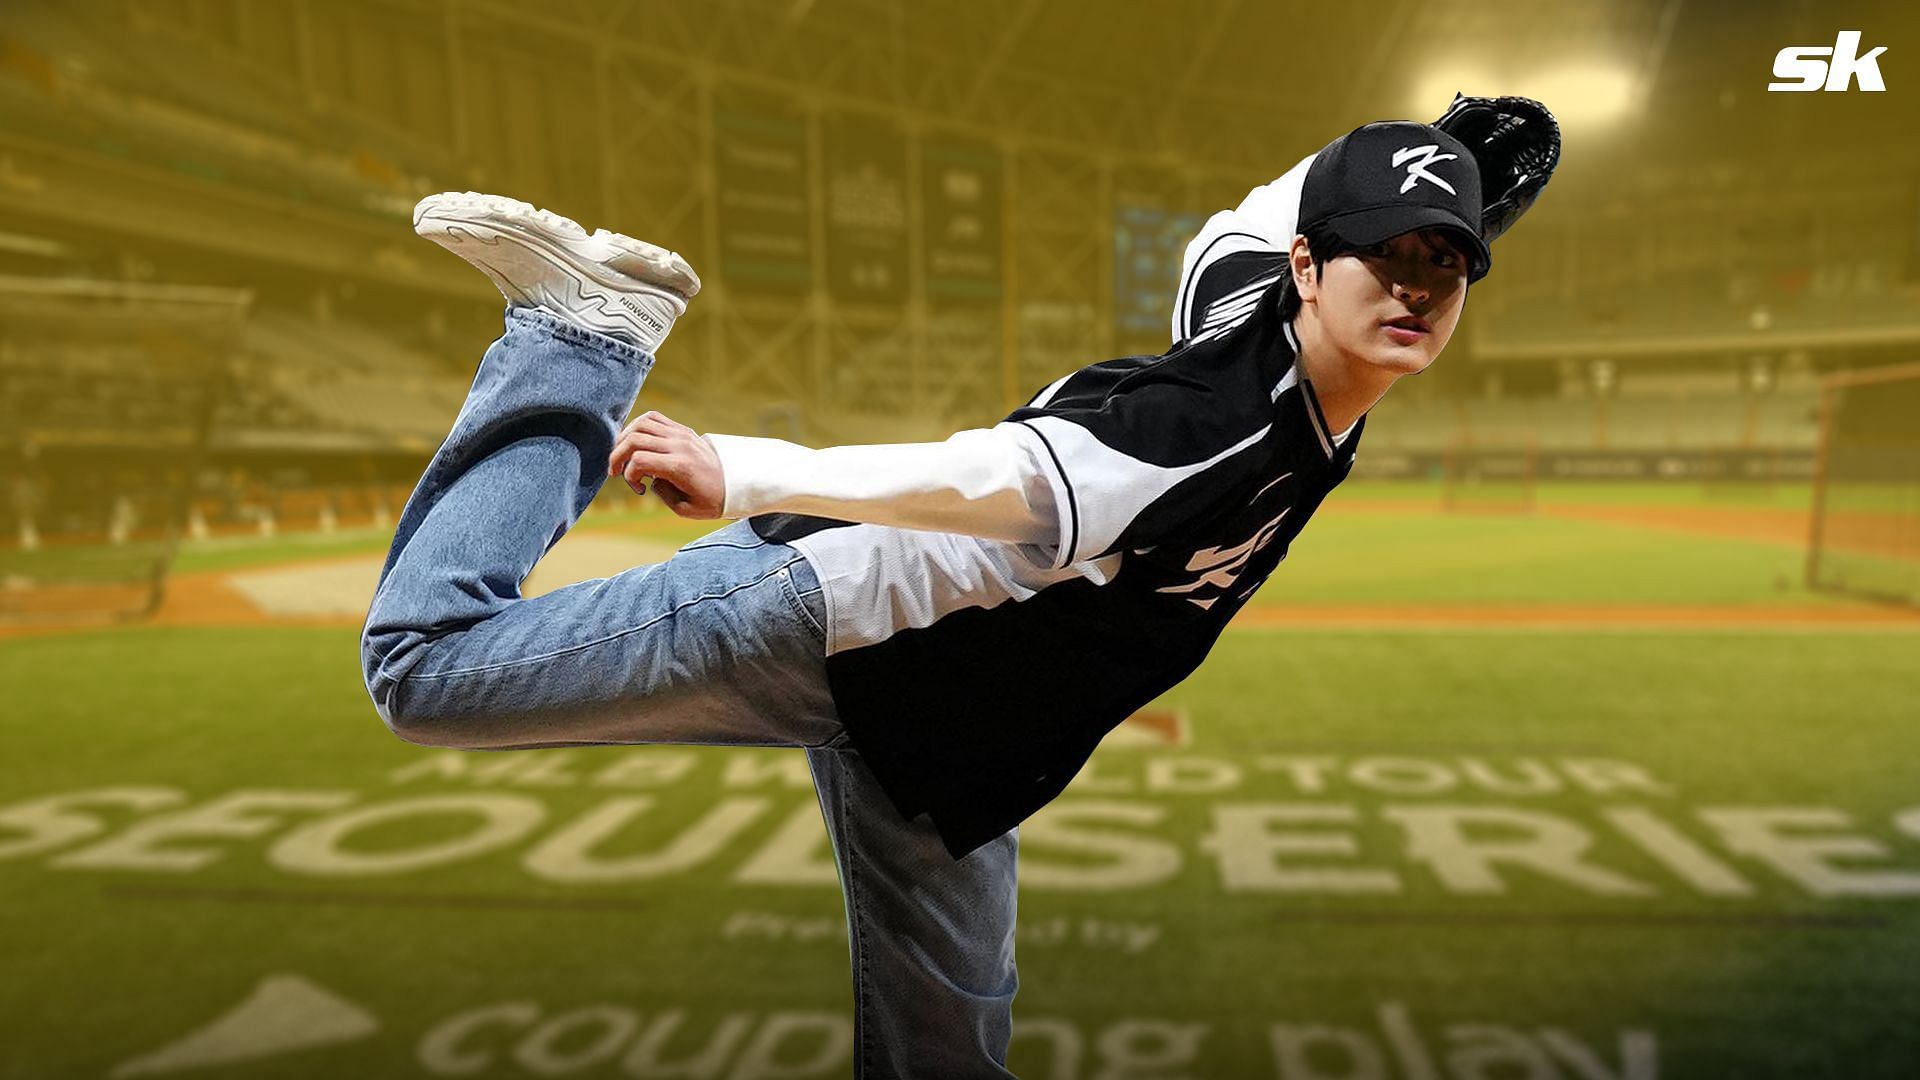 &quot;Dude throwing better than Yamamoto in spring training&quot; - K-Pop idol Kim Seungmin stuns MLB fans with spot-on first pitch